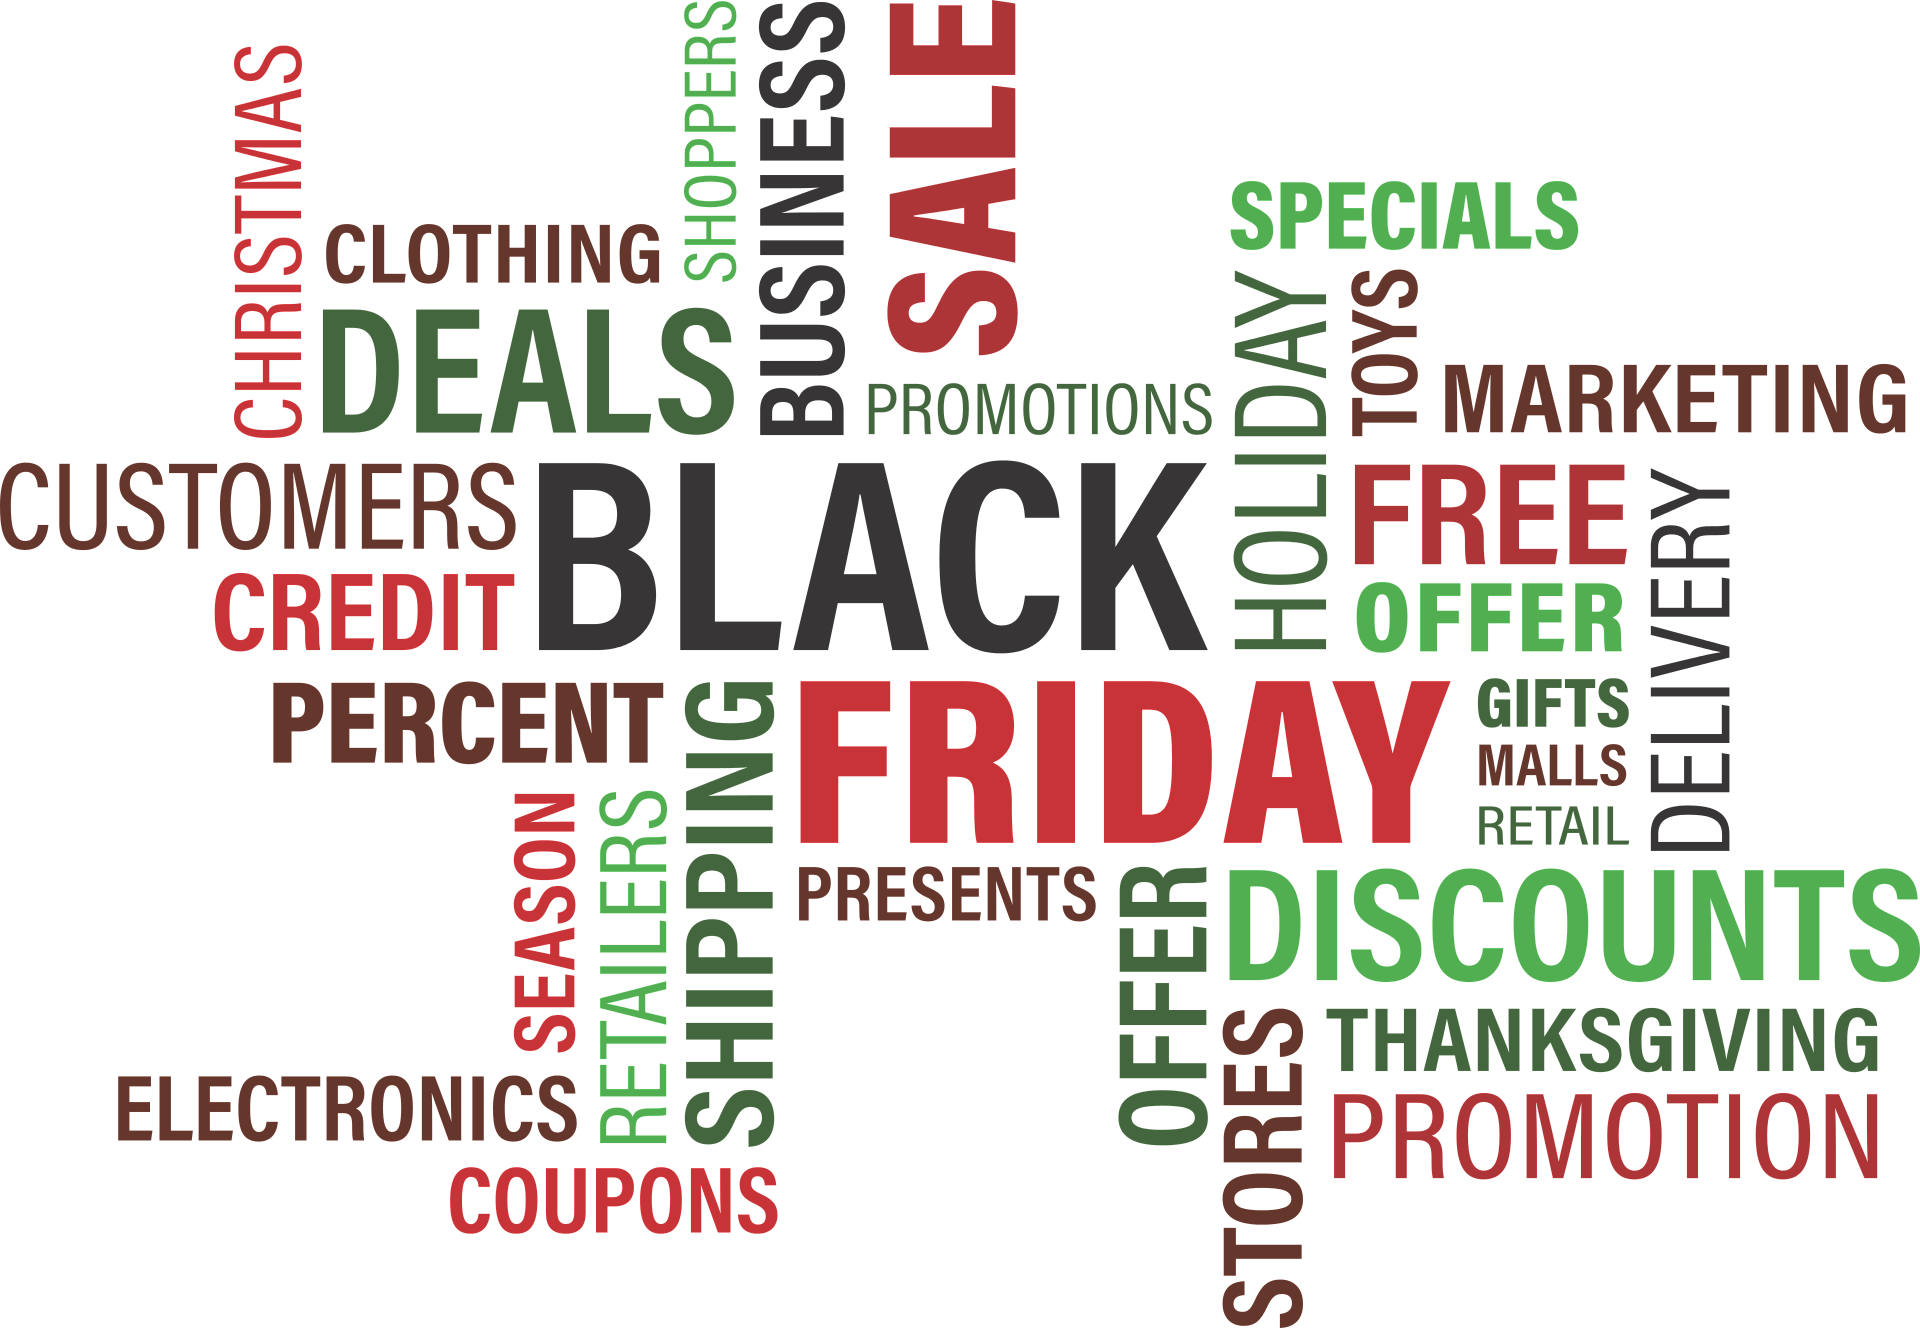 Image Showing a vector graphic related to Black Friday